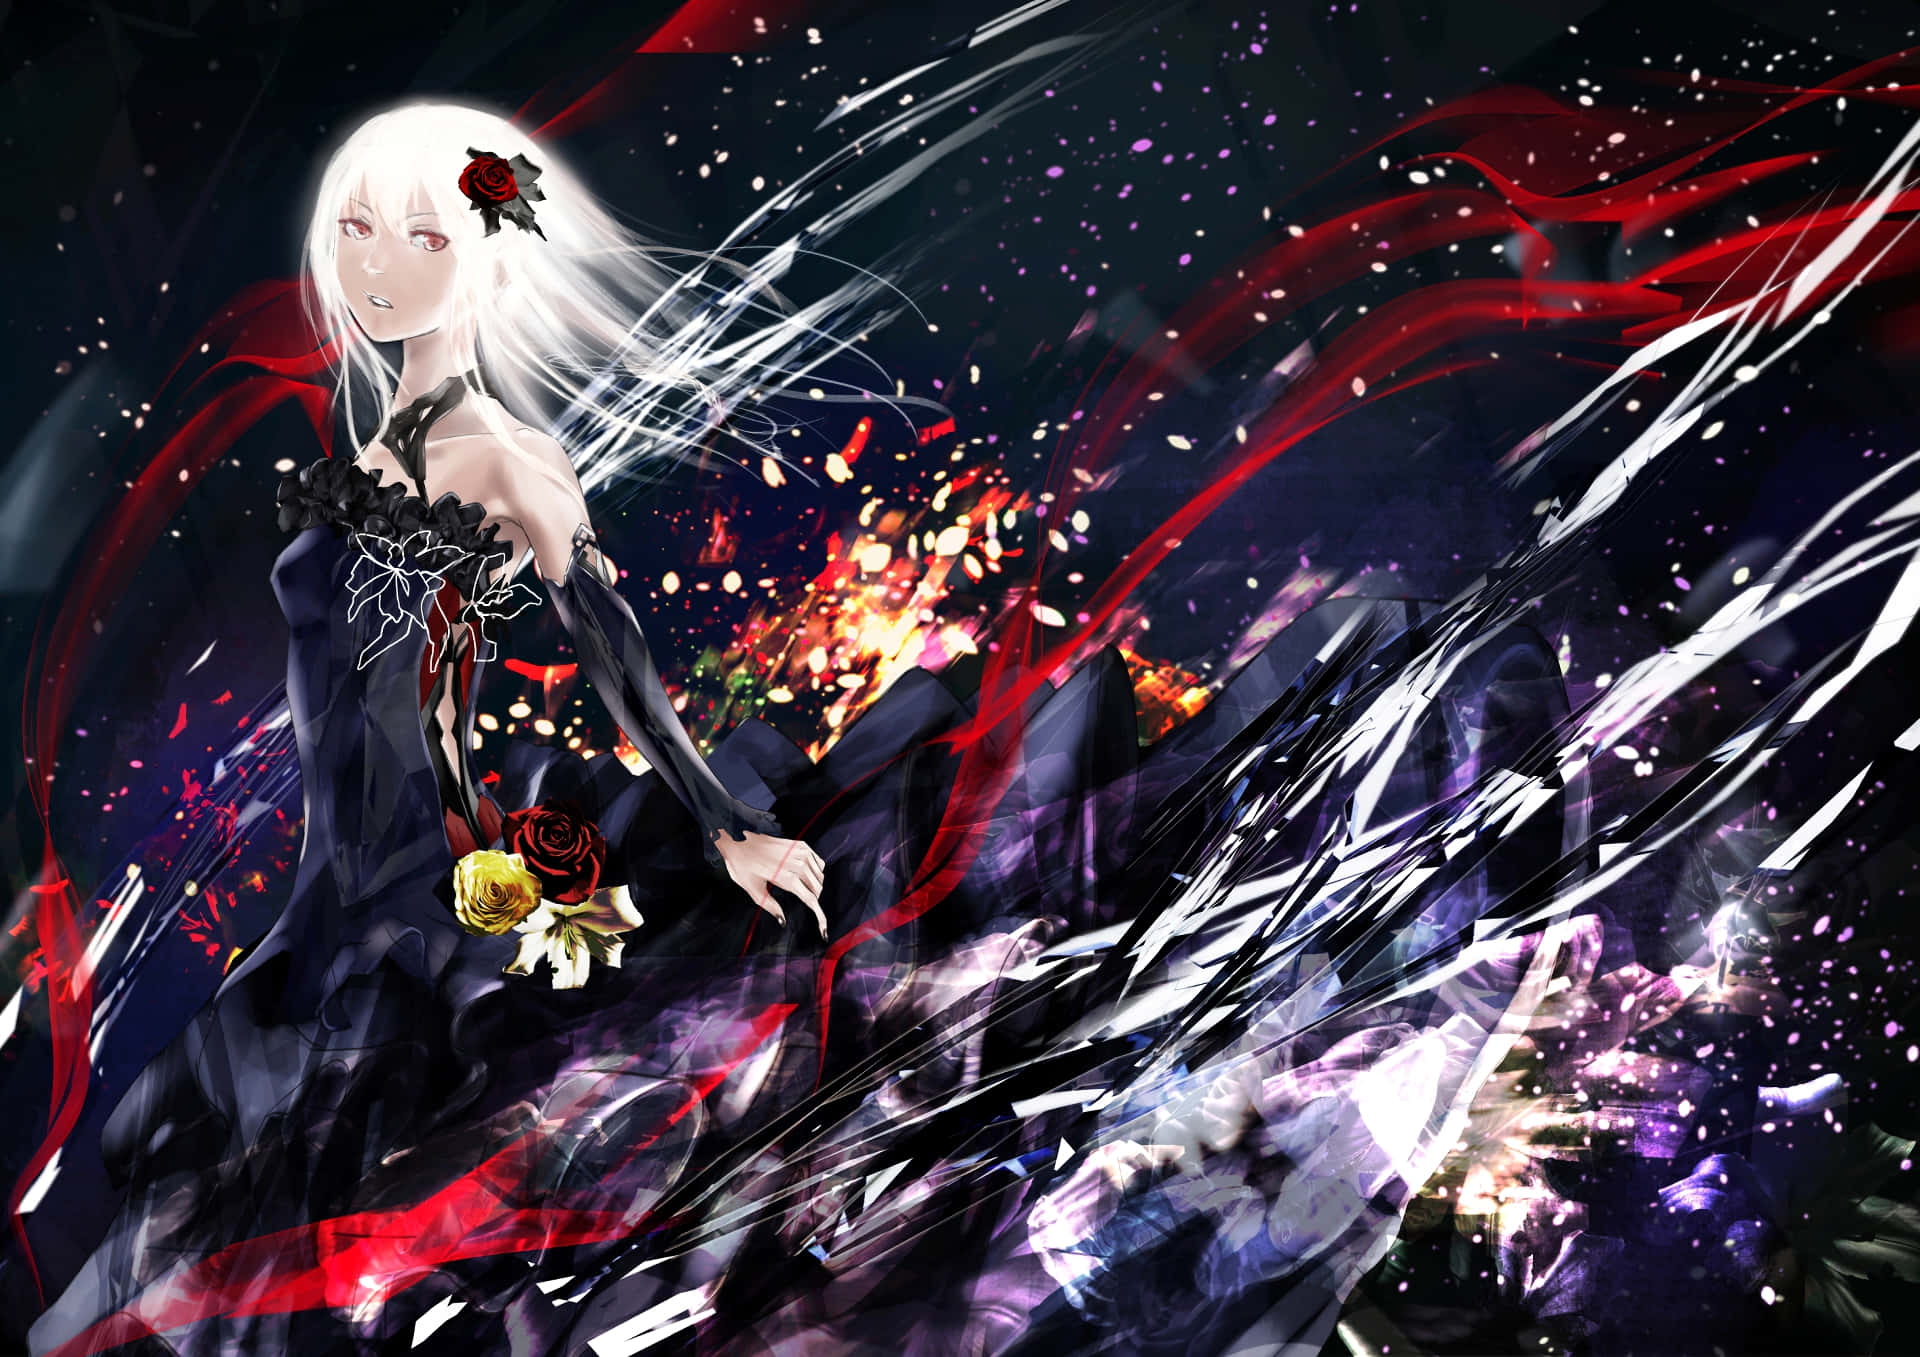 Discover the action and adventure of Guilty Crown with protagonist Shu Ouma!